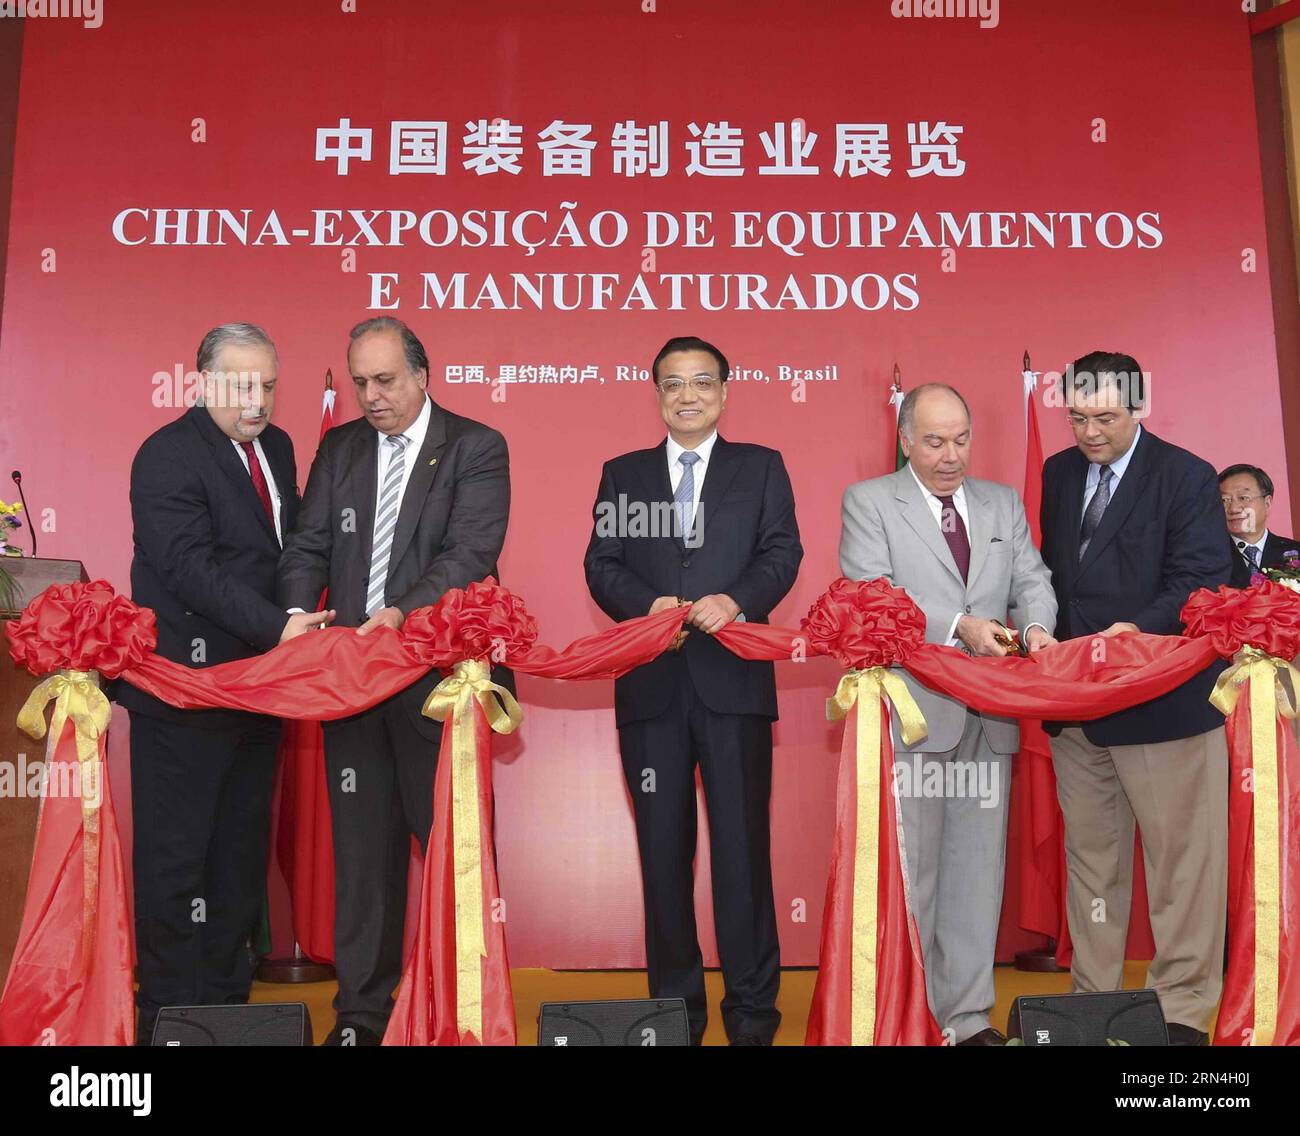 (150520) -- RIO DE JANEIRO, May 20, 2015 -- Chinese Premier Li Keqiang (C), Brazilian Foreign Minister Mauro Vieira (2nd R) and Rio de Janeiro Governor Luiz Fernando Pezao (2nd L) cut ribbon for a Chinese equipment manufacturing exhibition in Rio De Janeiro, Brazil, May 20, 2015. Li on Wednesday visited the exhibition which features heavy machinery, high-speed railway, nuclear power generation, carrier rockets and new energy cars in Rio De Janeiro. ) (wf) BRAZIL-RIO DE JANEIRO-CHINESE PREMIER-VISIT DingxLin PUBLICATIONxNOTxINxCHN   150520 Rio de Janeiro May 20 2015 Chinese Premier left Keqiang Stock Photo